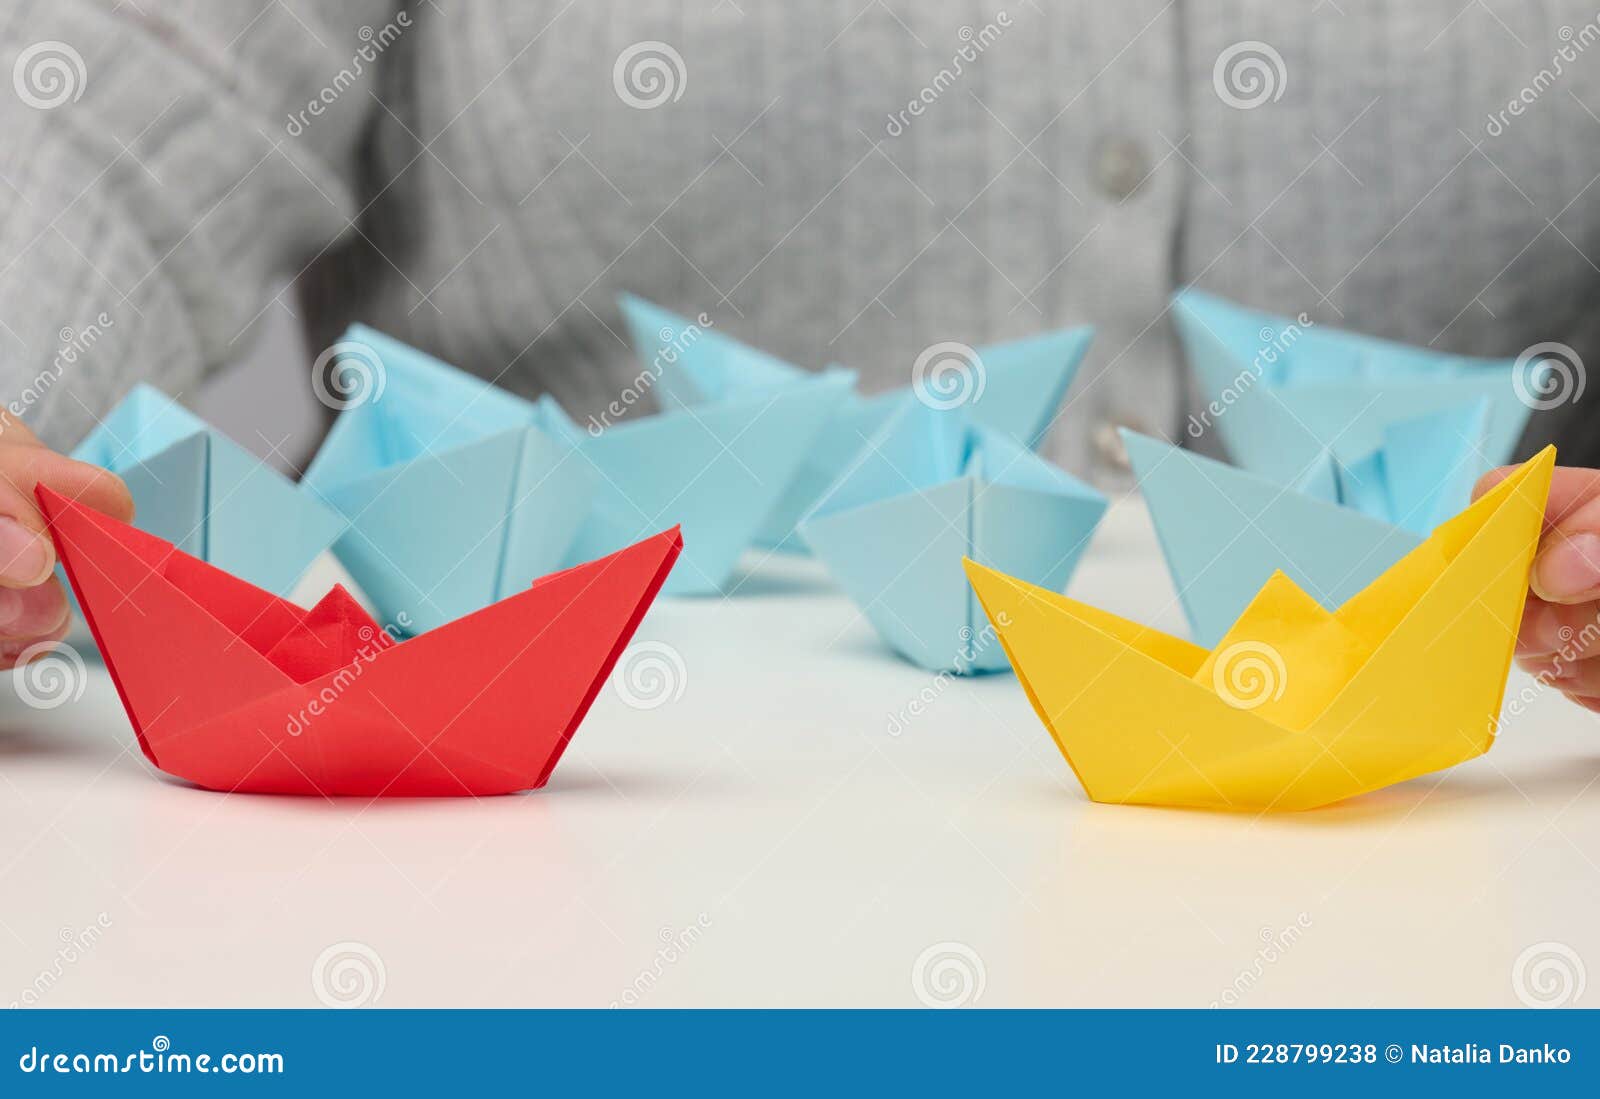 female hands hold red and yellow paper boats on a white table. confrontation, follow a strong leader, dailog